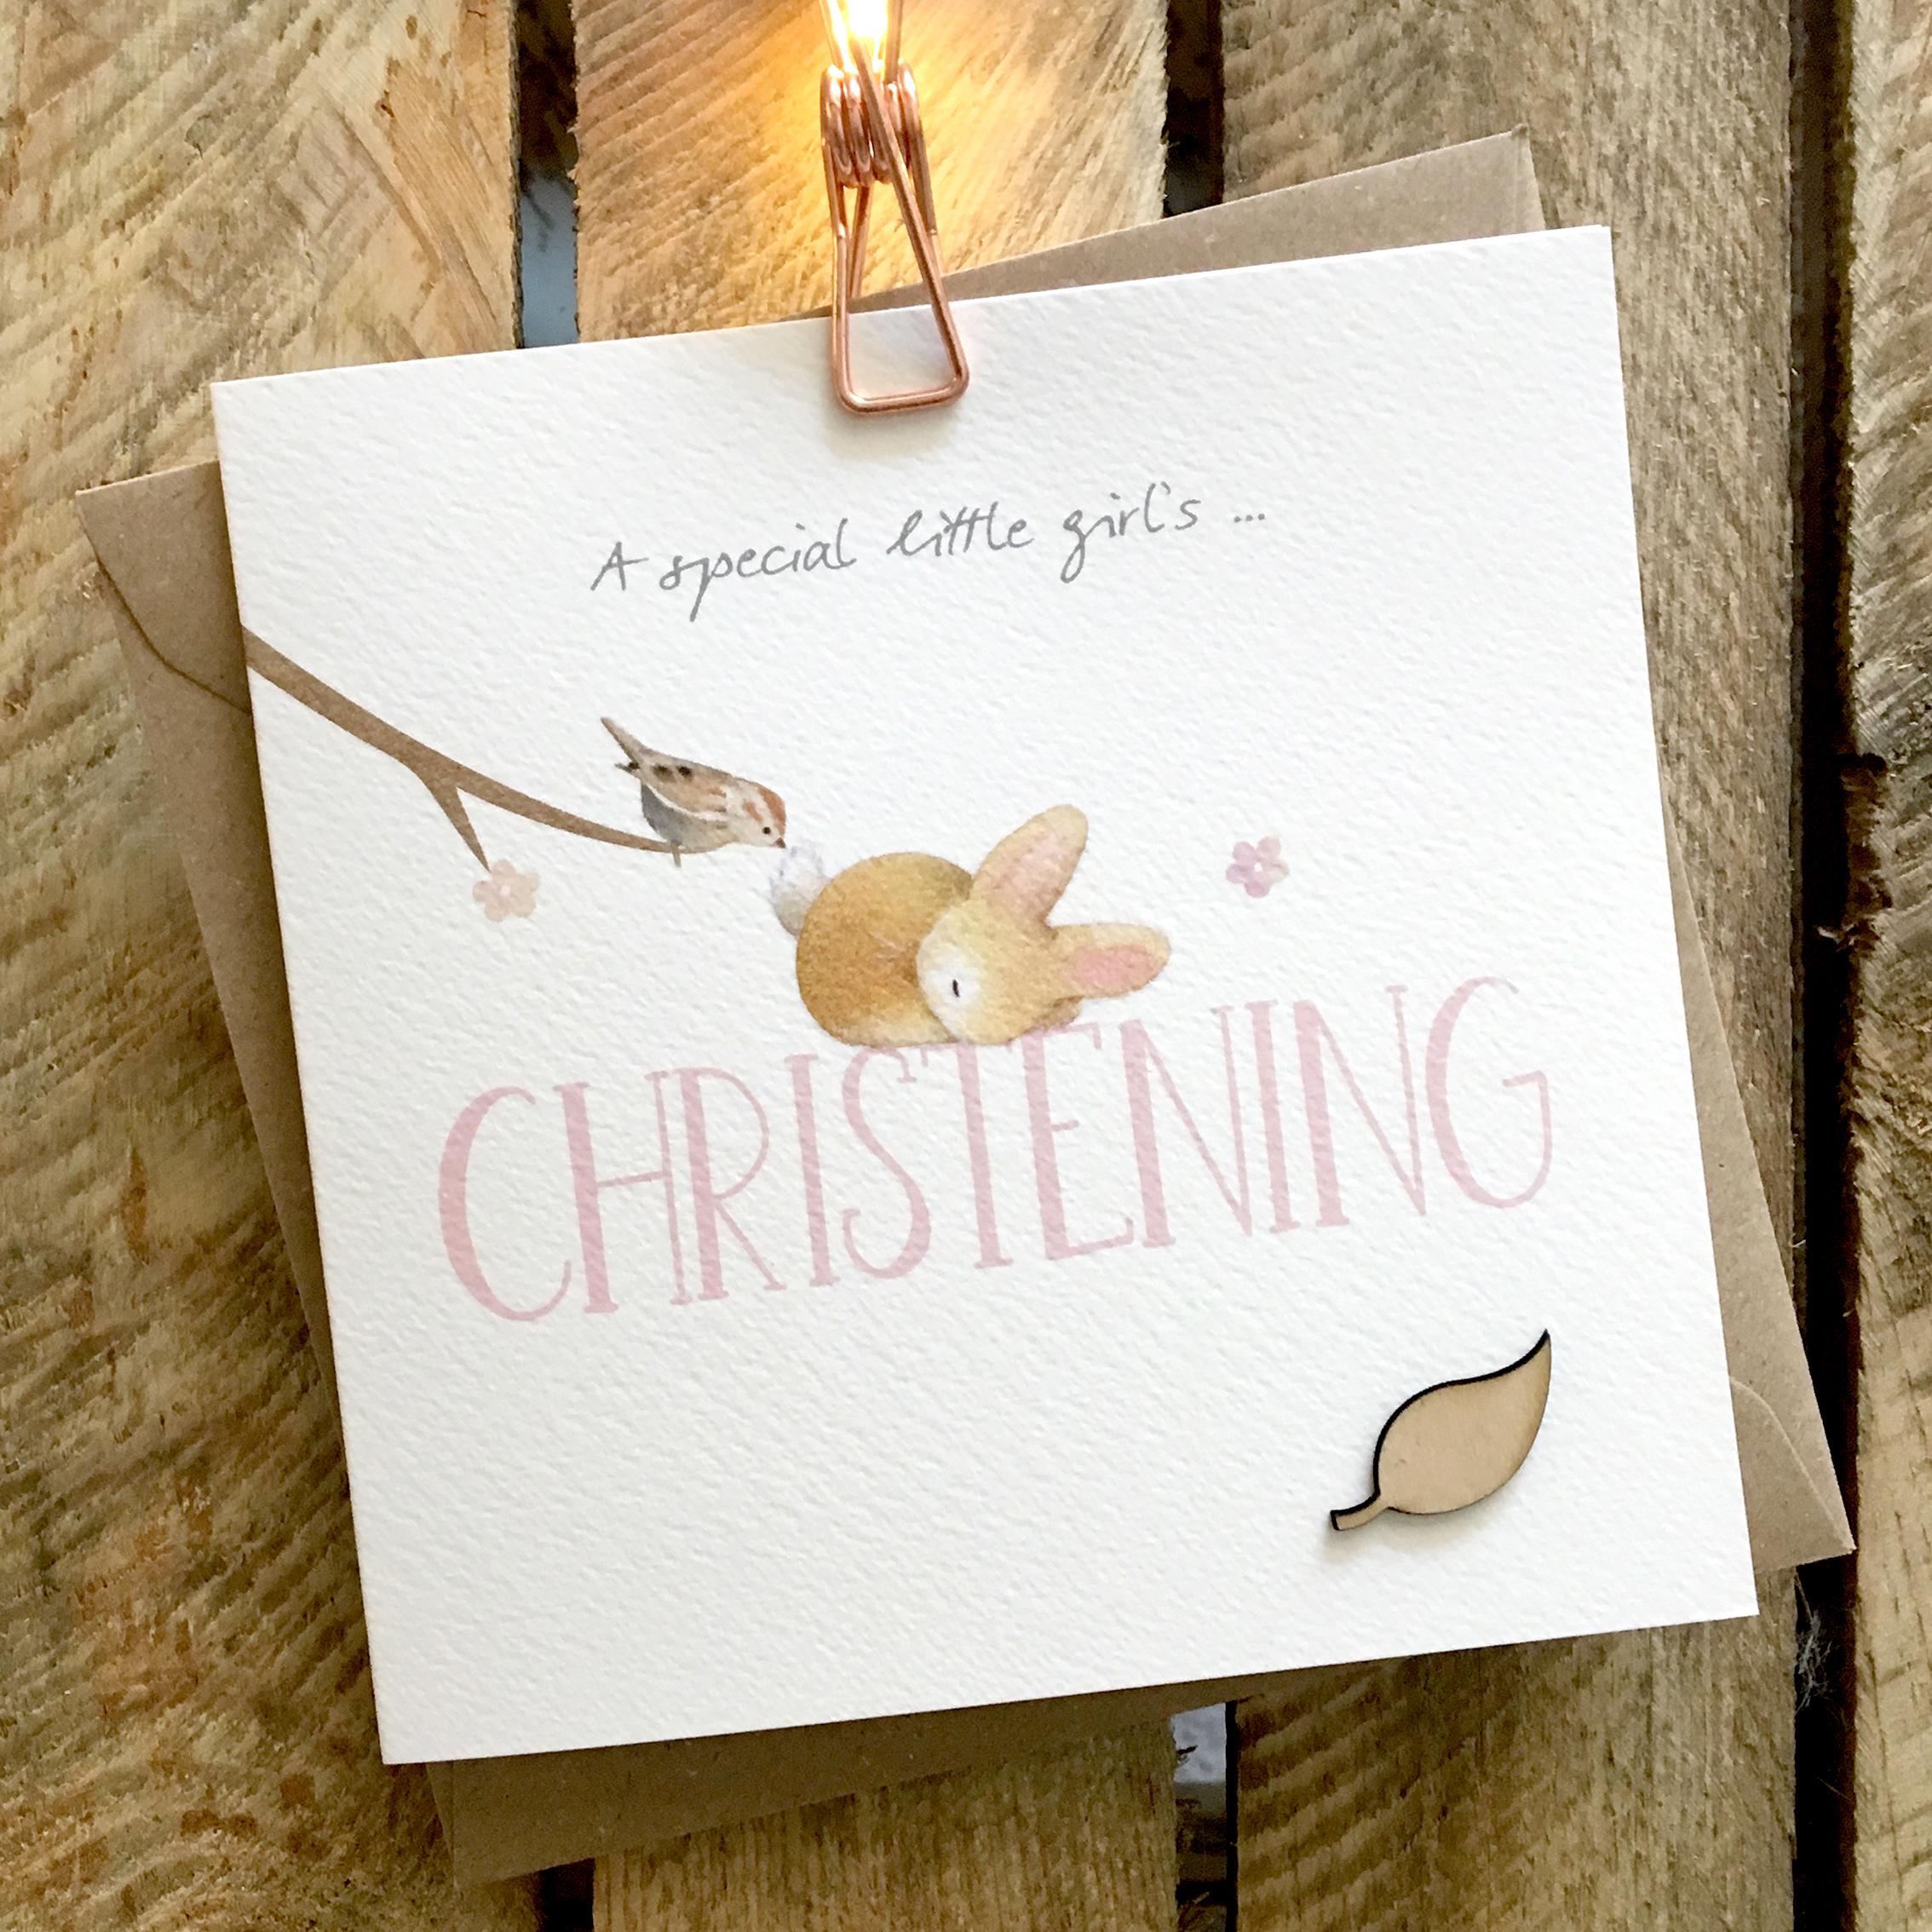 Card featuring a fluffy baby rabbit and small bird on top of a large pink CHRISTENING caption